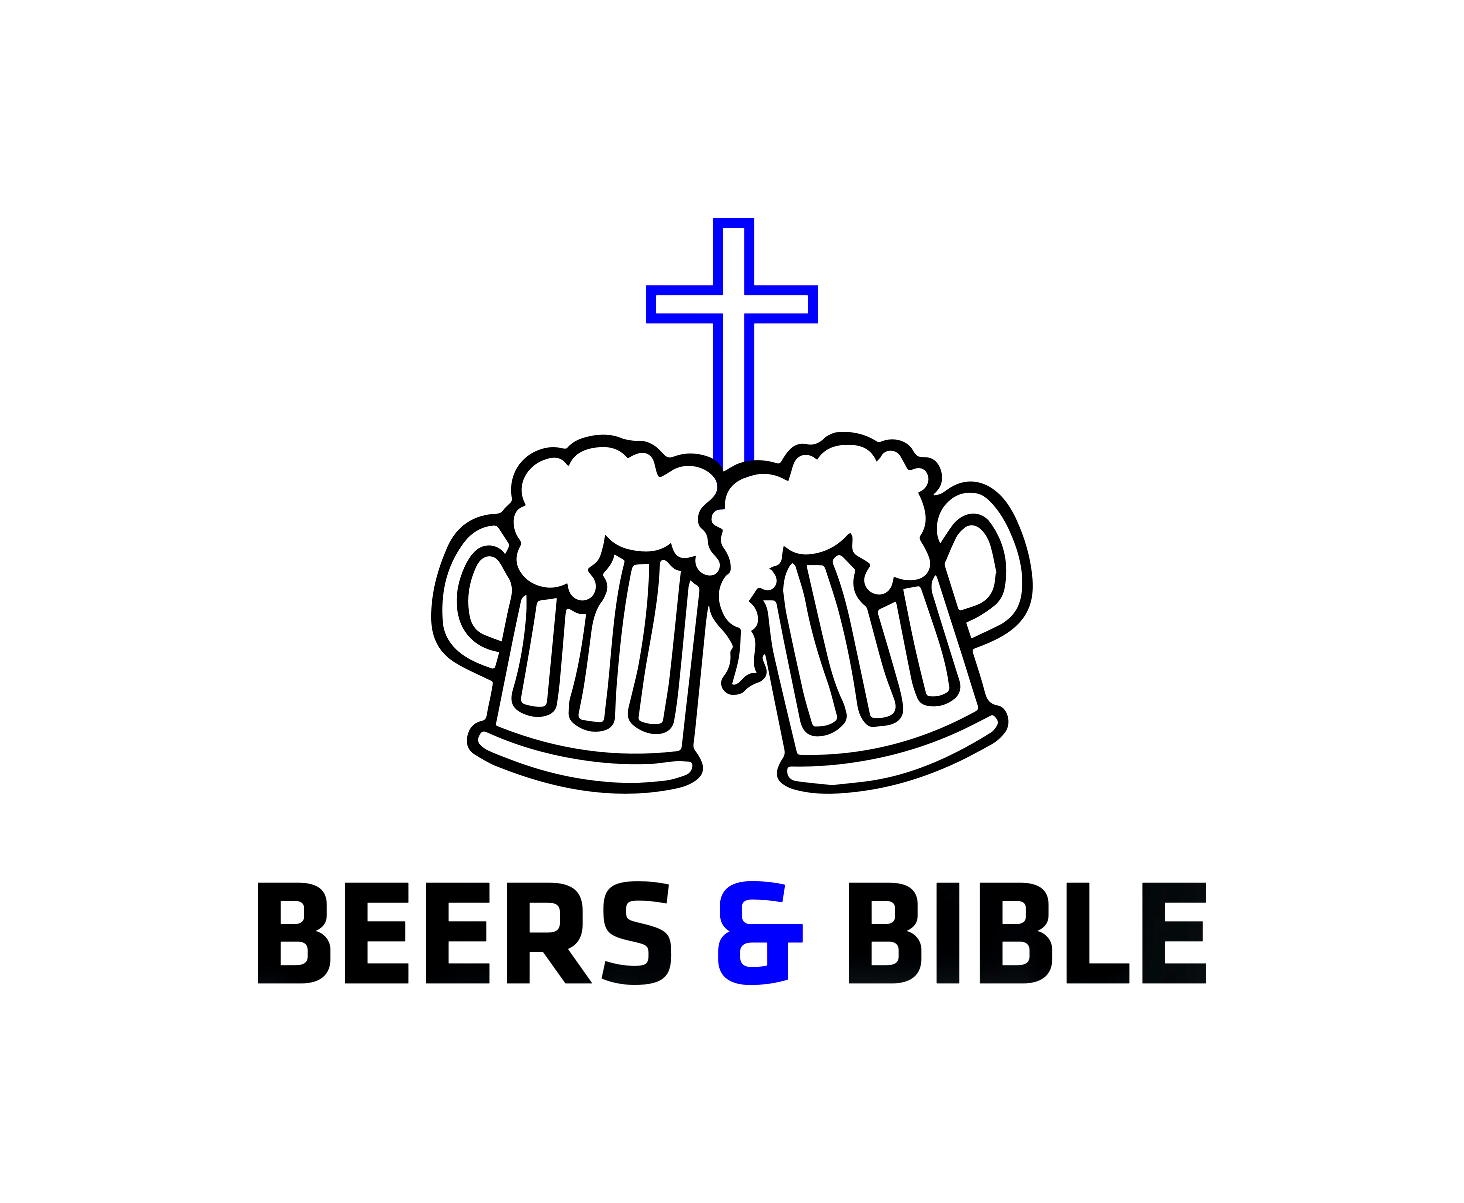 Beers and Bible logo